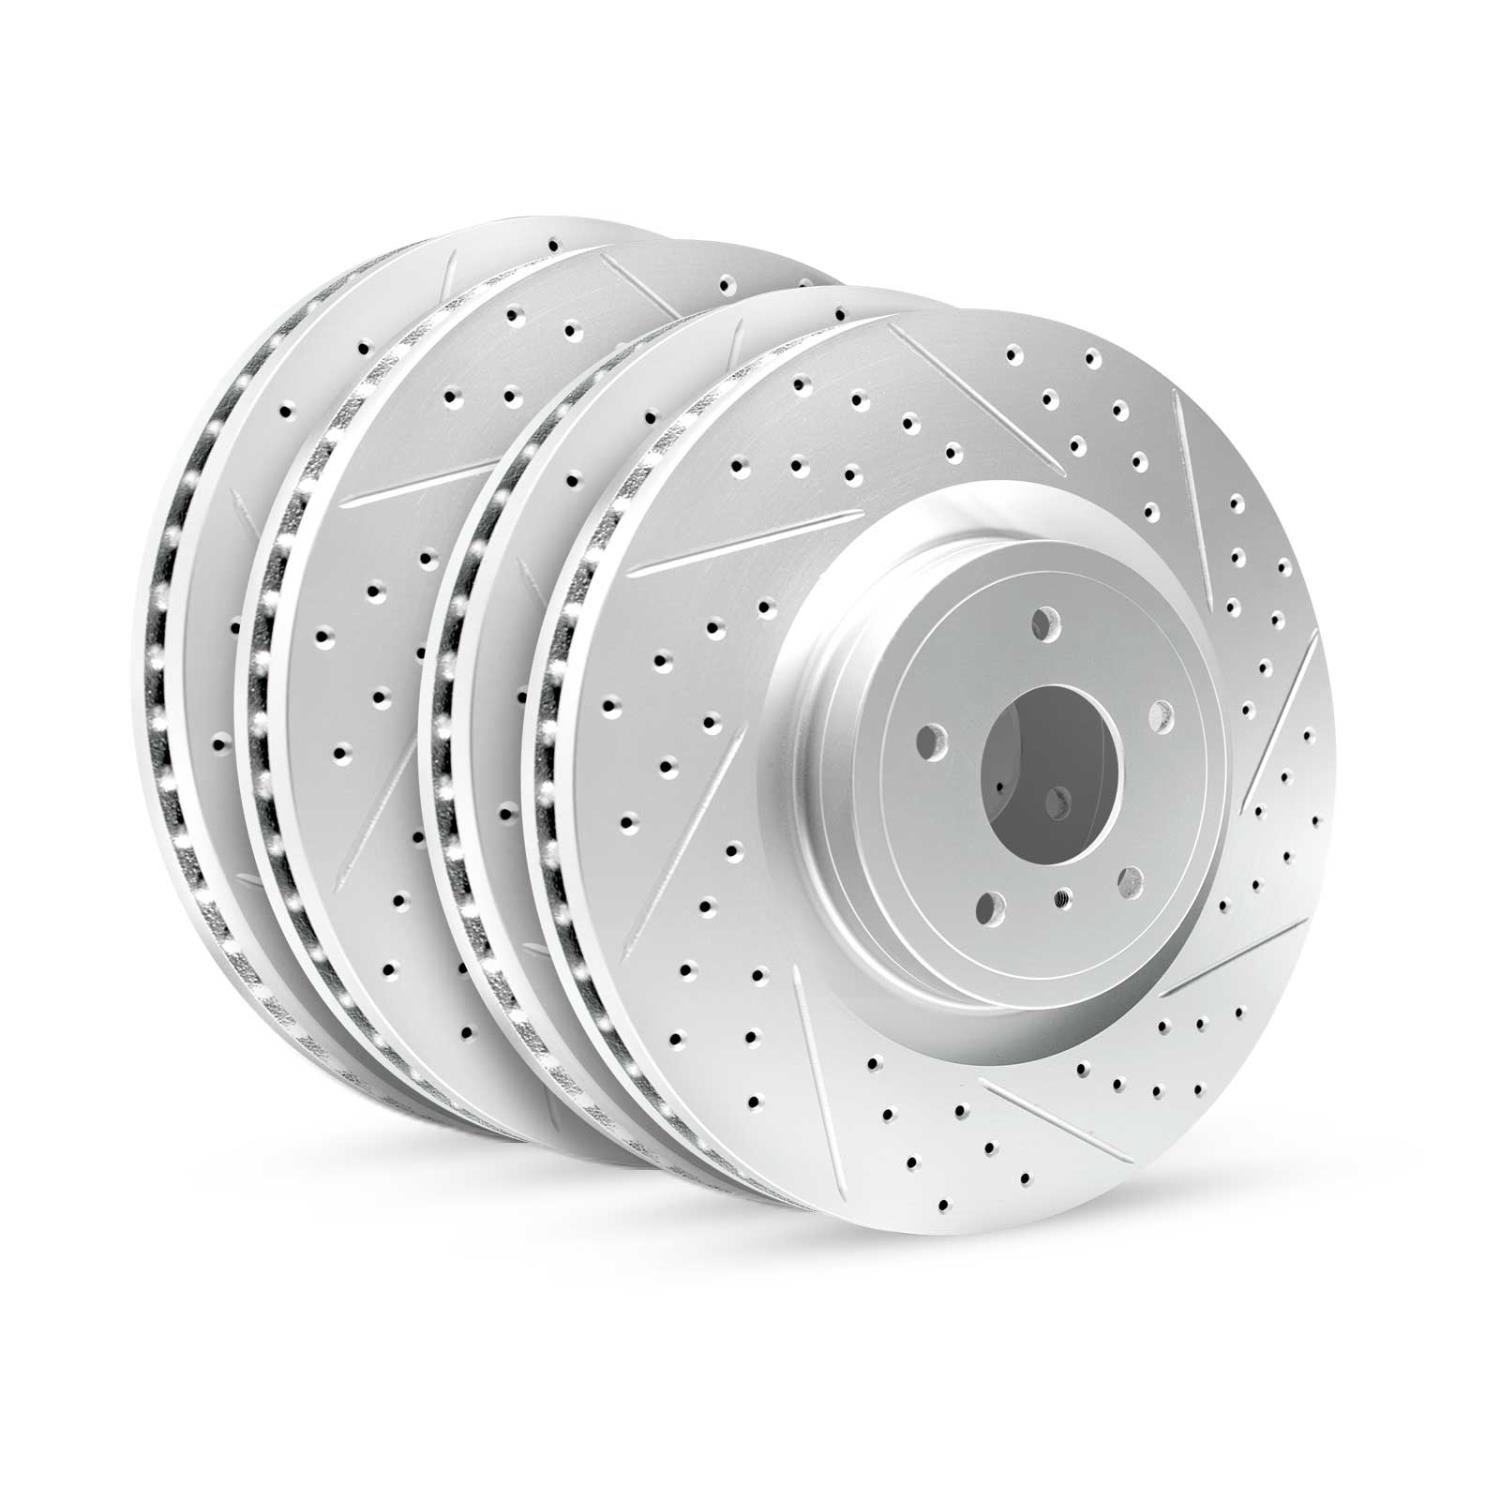 GEO-Carbon Drilled/Slotted Rotors, Fits Select Infiniti/Nissan,